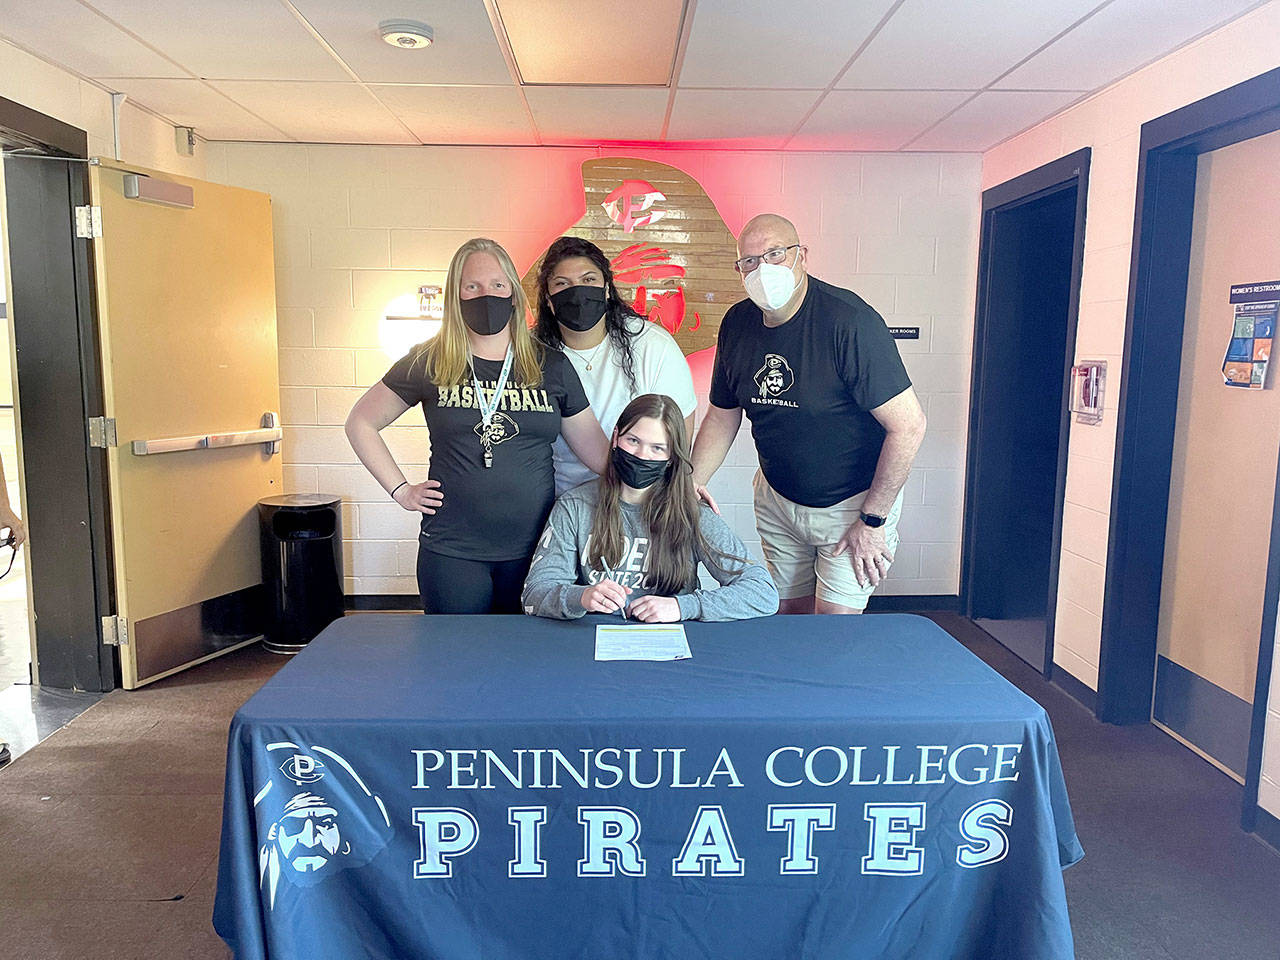 Port Angeles senior Myra Walker, seated, has signed a letter of intent to play basketball for Peninsula College. Walker is joined by from left, Peninsula head coach Alison Crumb and assistant coaches Gabi Fenumiai and Mike Knowles.